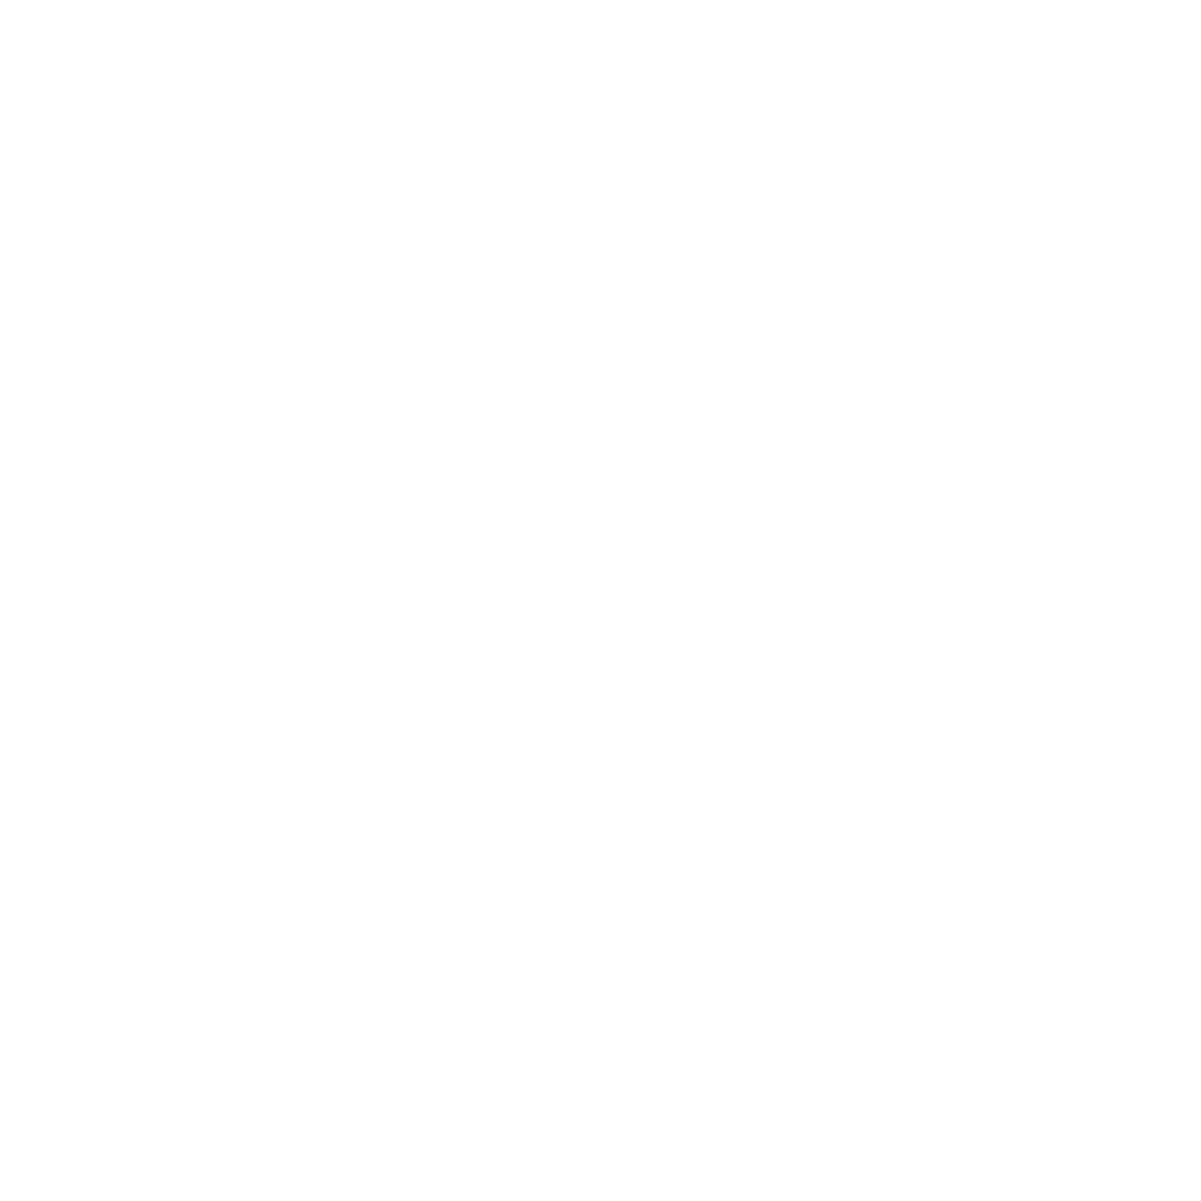 A white logo showing an infinity icon and text on a transparent background.